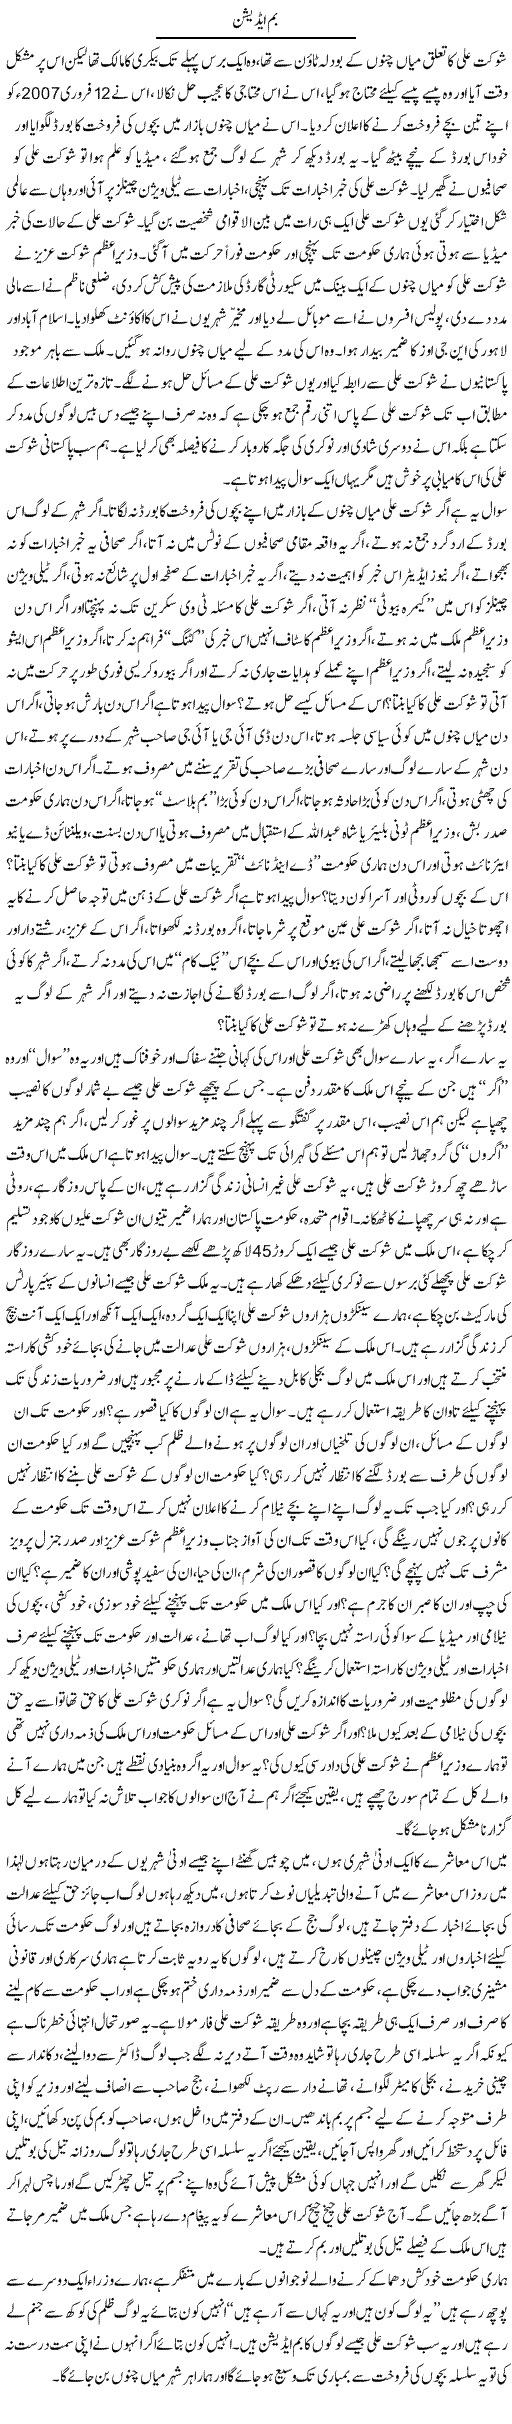 Bomb Edition by Javed Chaudhry 20 feb 2007